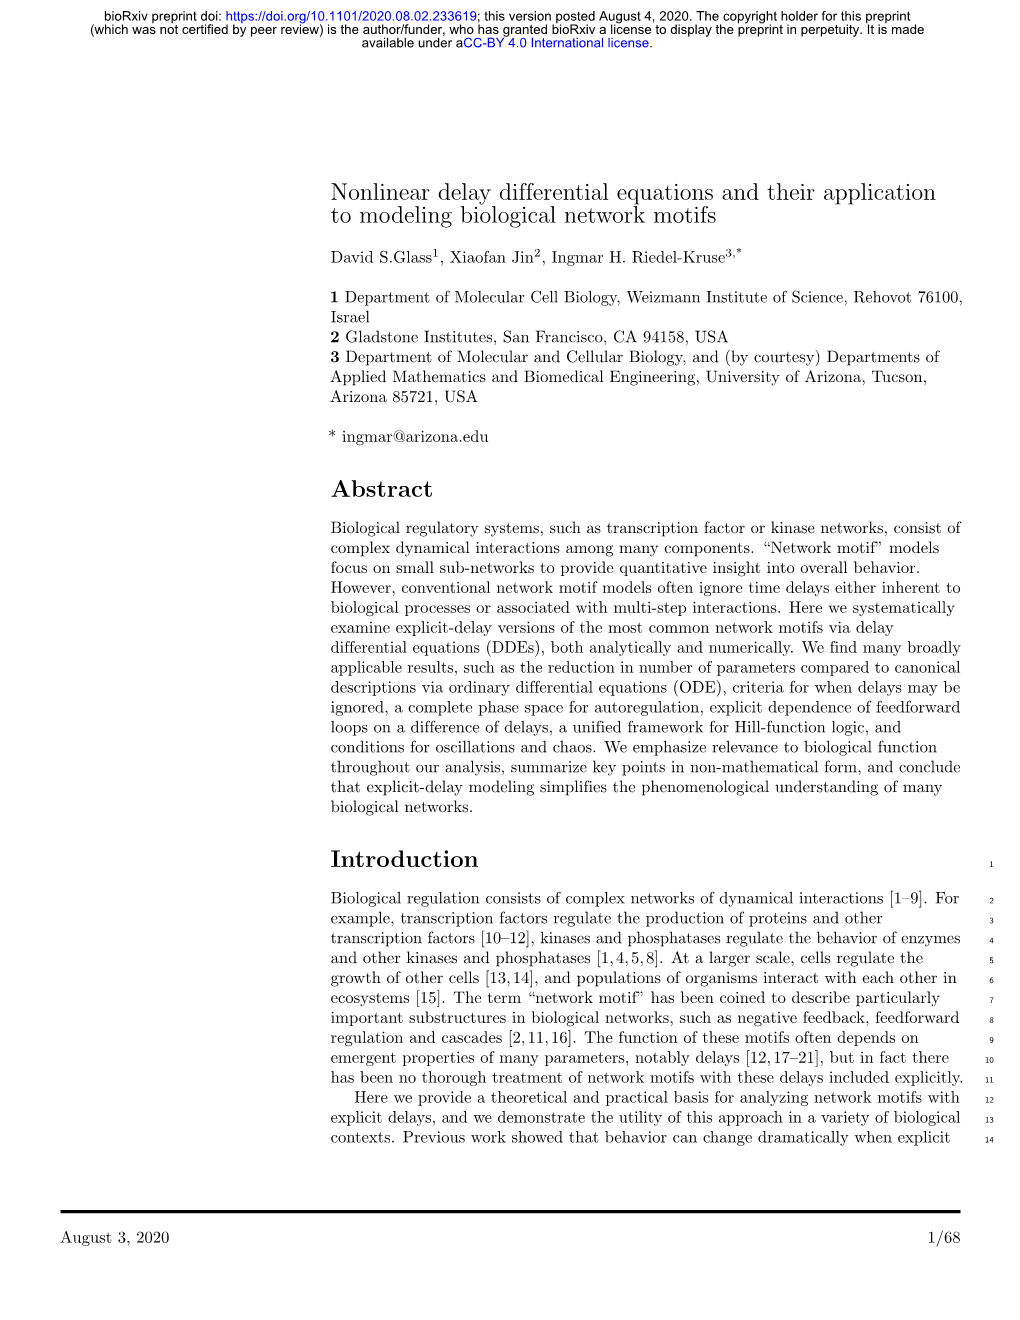 Nonlinear Delay Differential Equations and Their Application to Modeling Biological Network Motifs